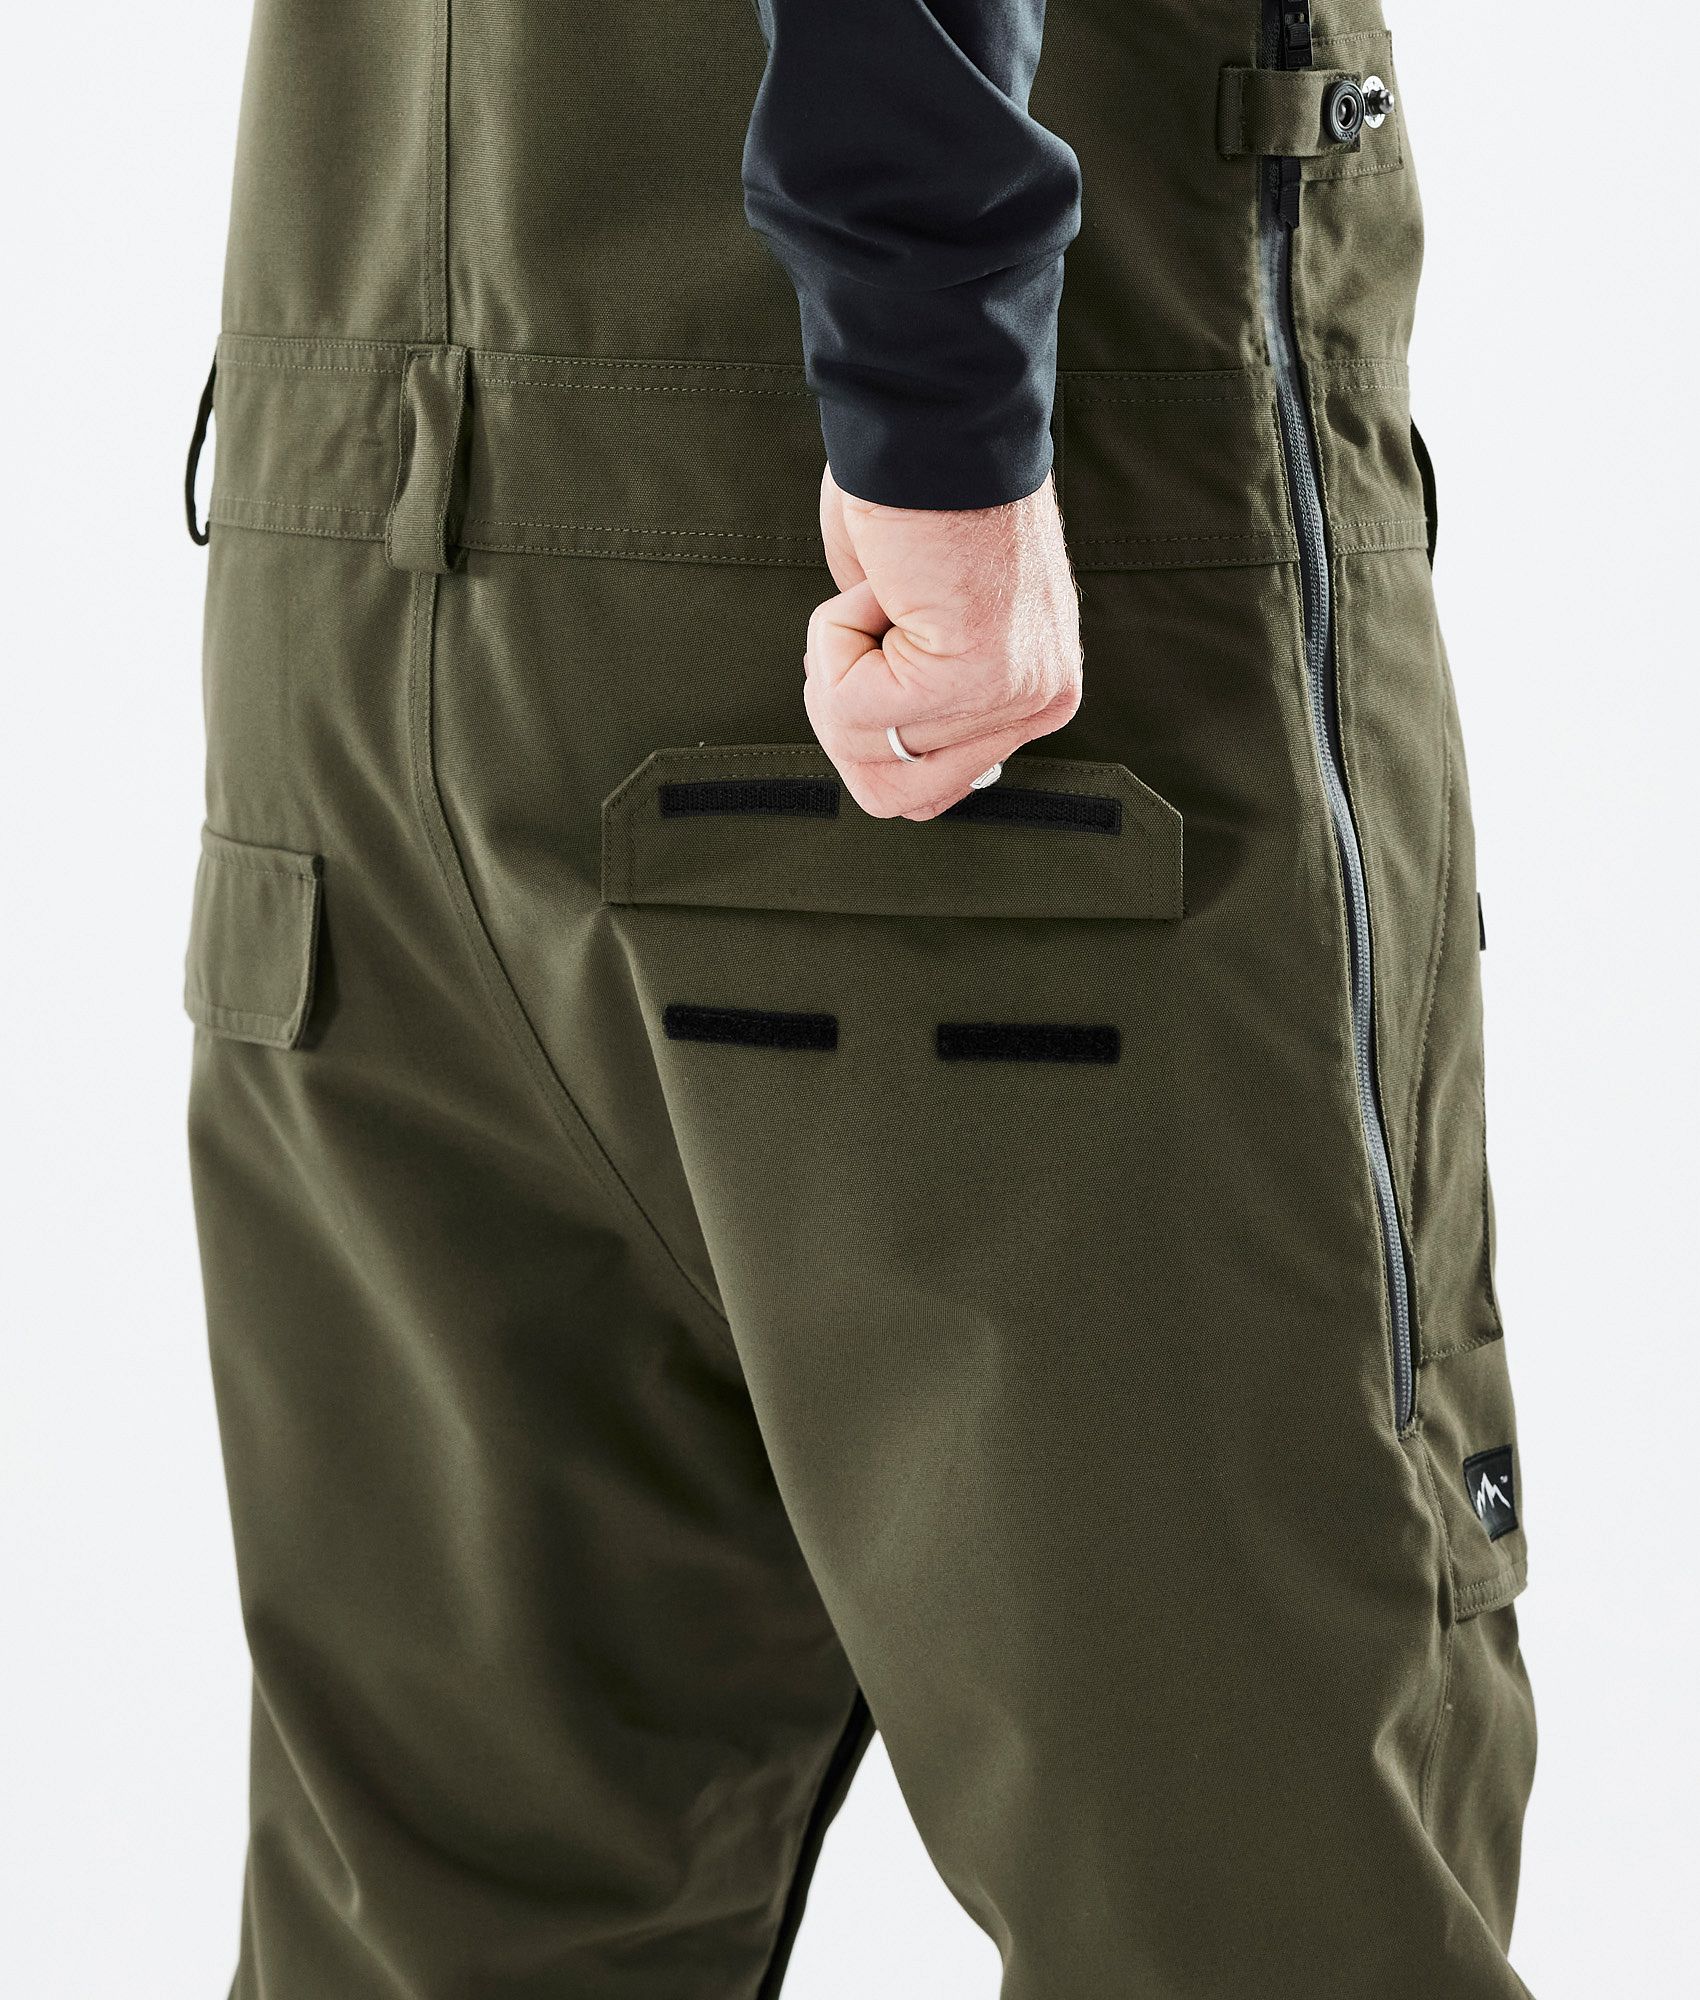 Buy Mehndi Green Four Pocket Cargo Pants Pure Cotton for Best Price,  Reviews, Free Shipping